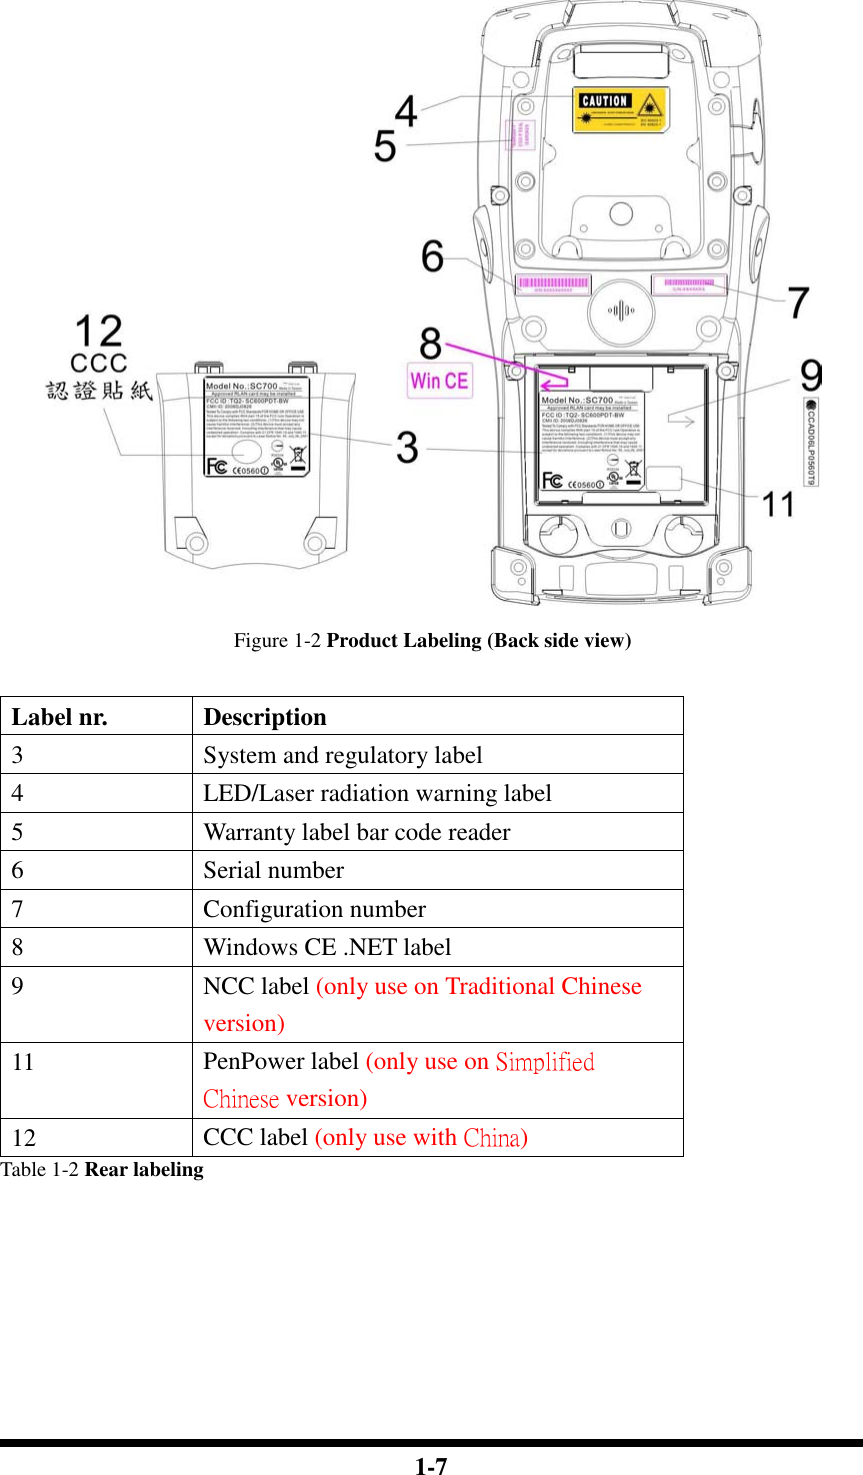  1-7   Figure 1-2 Product Labeling (Back side view)  Label nr.  Description 3  System and regulatory label 4  LED/Laser radiation warning label 5  Warranty label bar code reader 6  Serial number 7  Configuration number 8  Windows CE .NET label 9  NCC label (only use on Traditional Chinese version) 11  PenPower label (only use on Simplified Chinese version) 12  CCC label (only use with China) Table 1-2 Rear labeling      